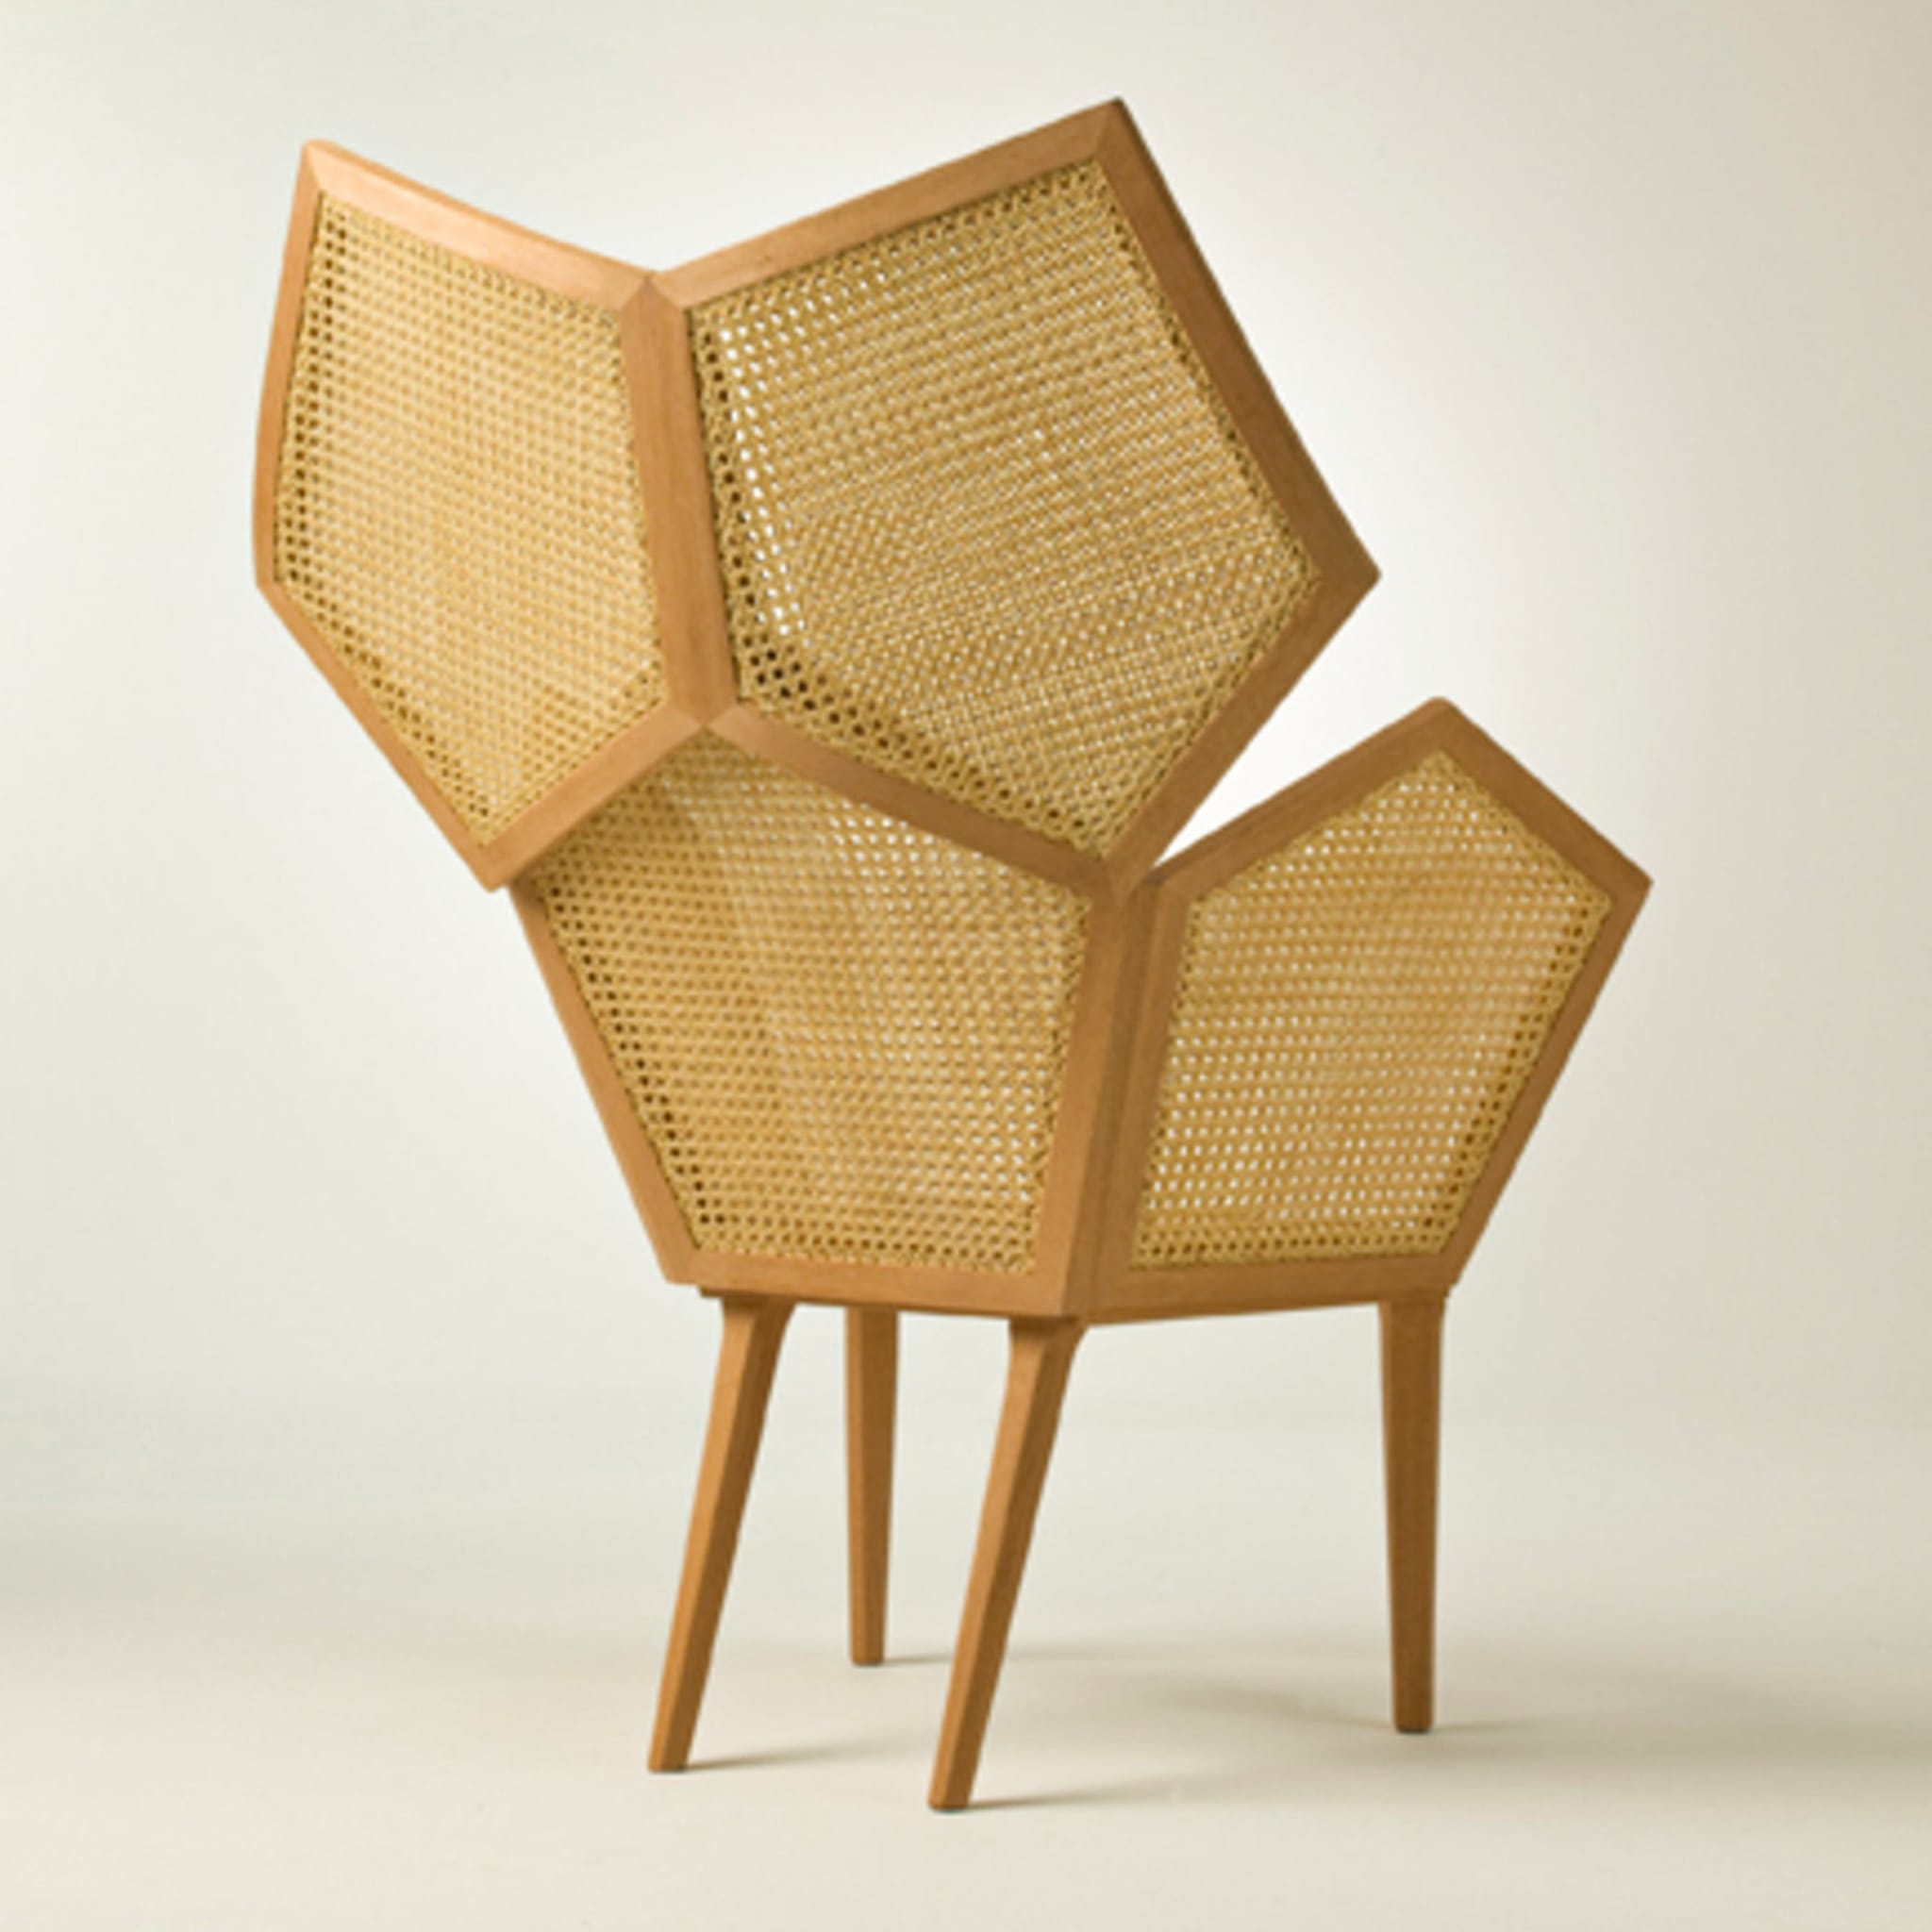 Lui 5/A Armchair in Natural Cane by Philippe Bestenheider - Alternative view 1